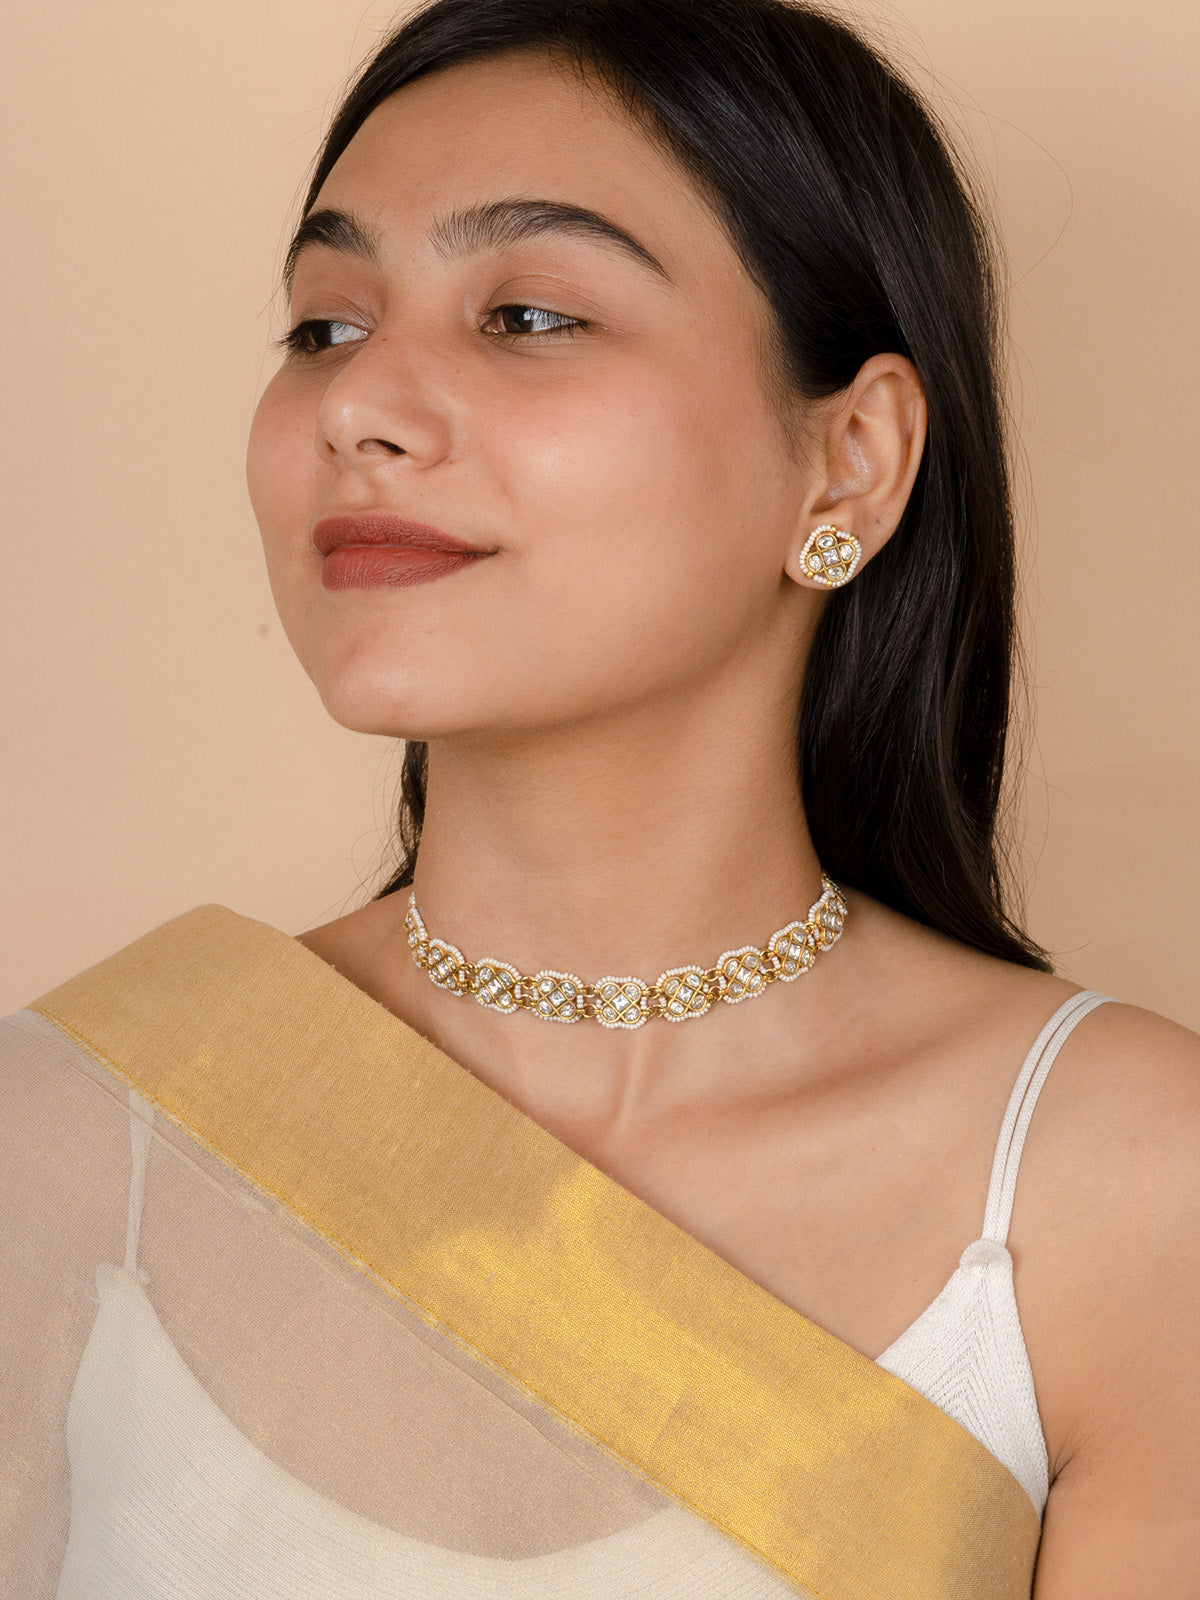 MR-S623W - Gold Plated Mishr Choker Necklace Set